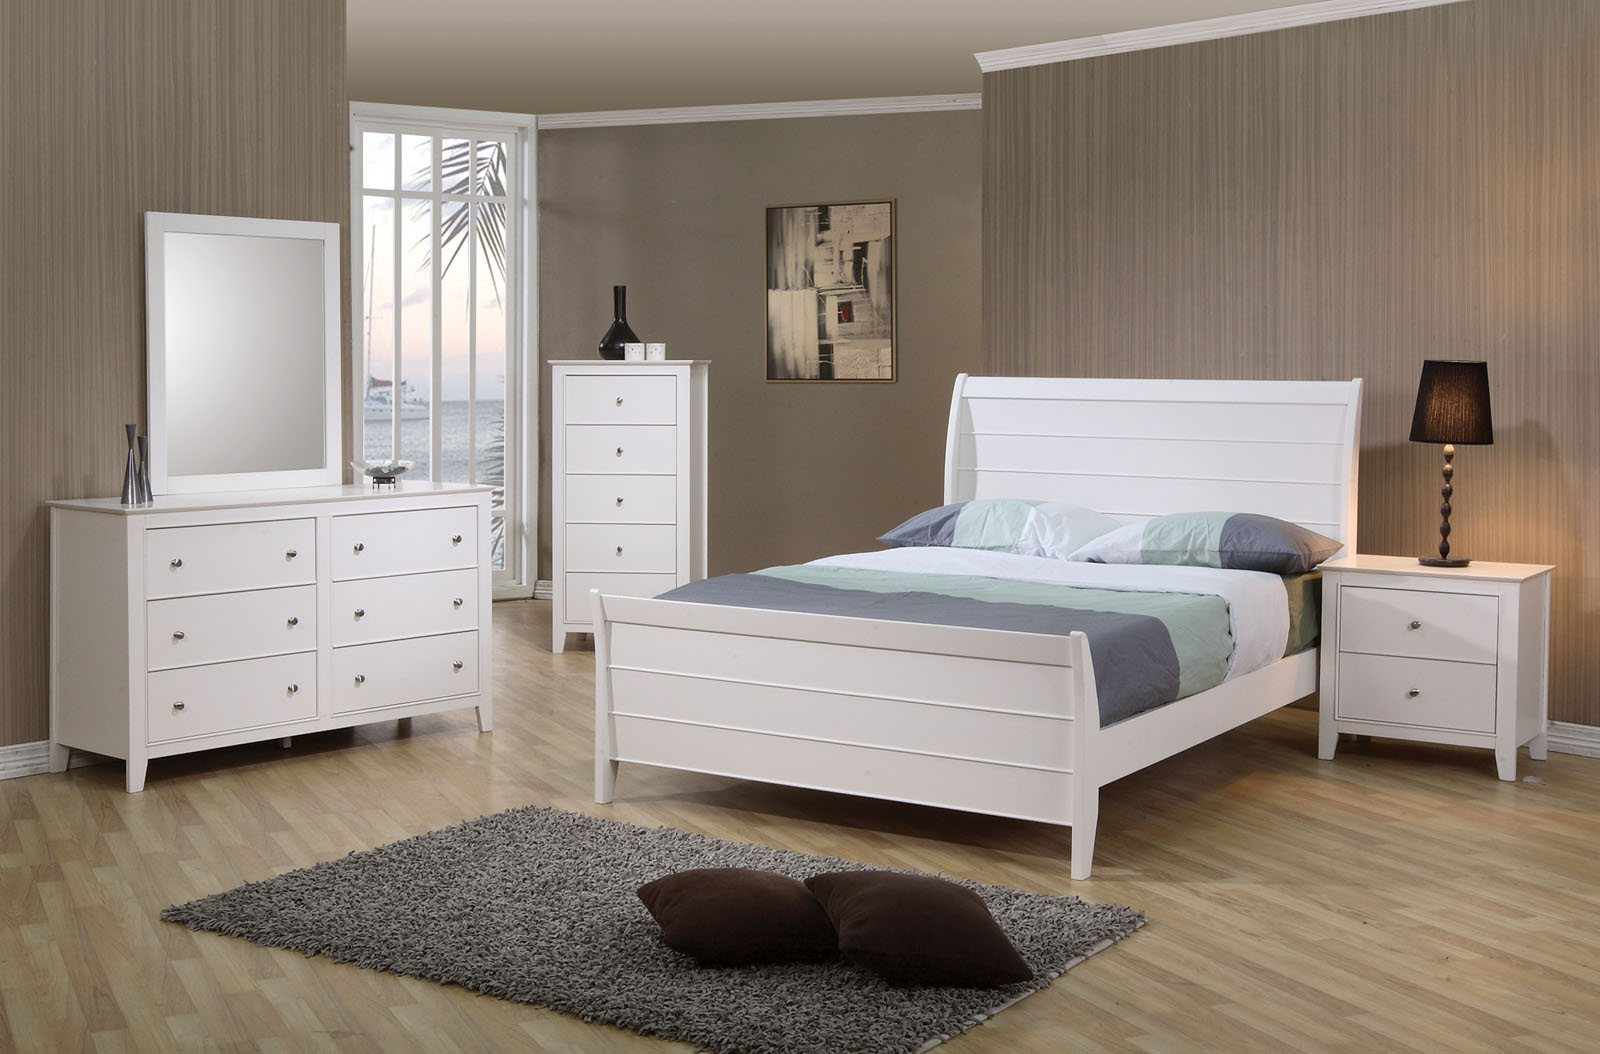 Coaster Selena Youth 4pc Sleigh Bedroom Set In White 400231 in dimensions 1600 X 1054